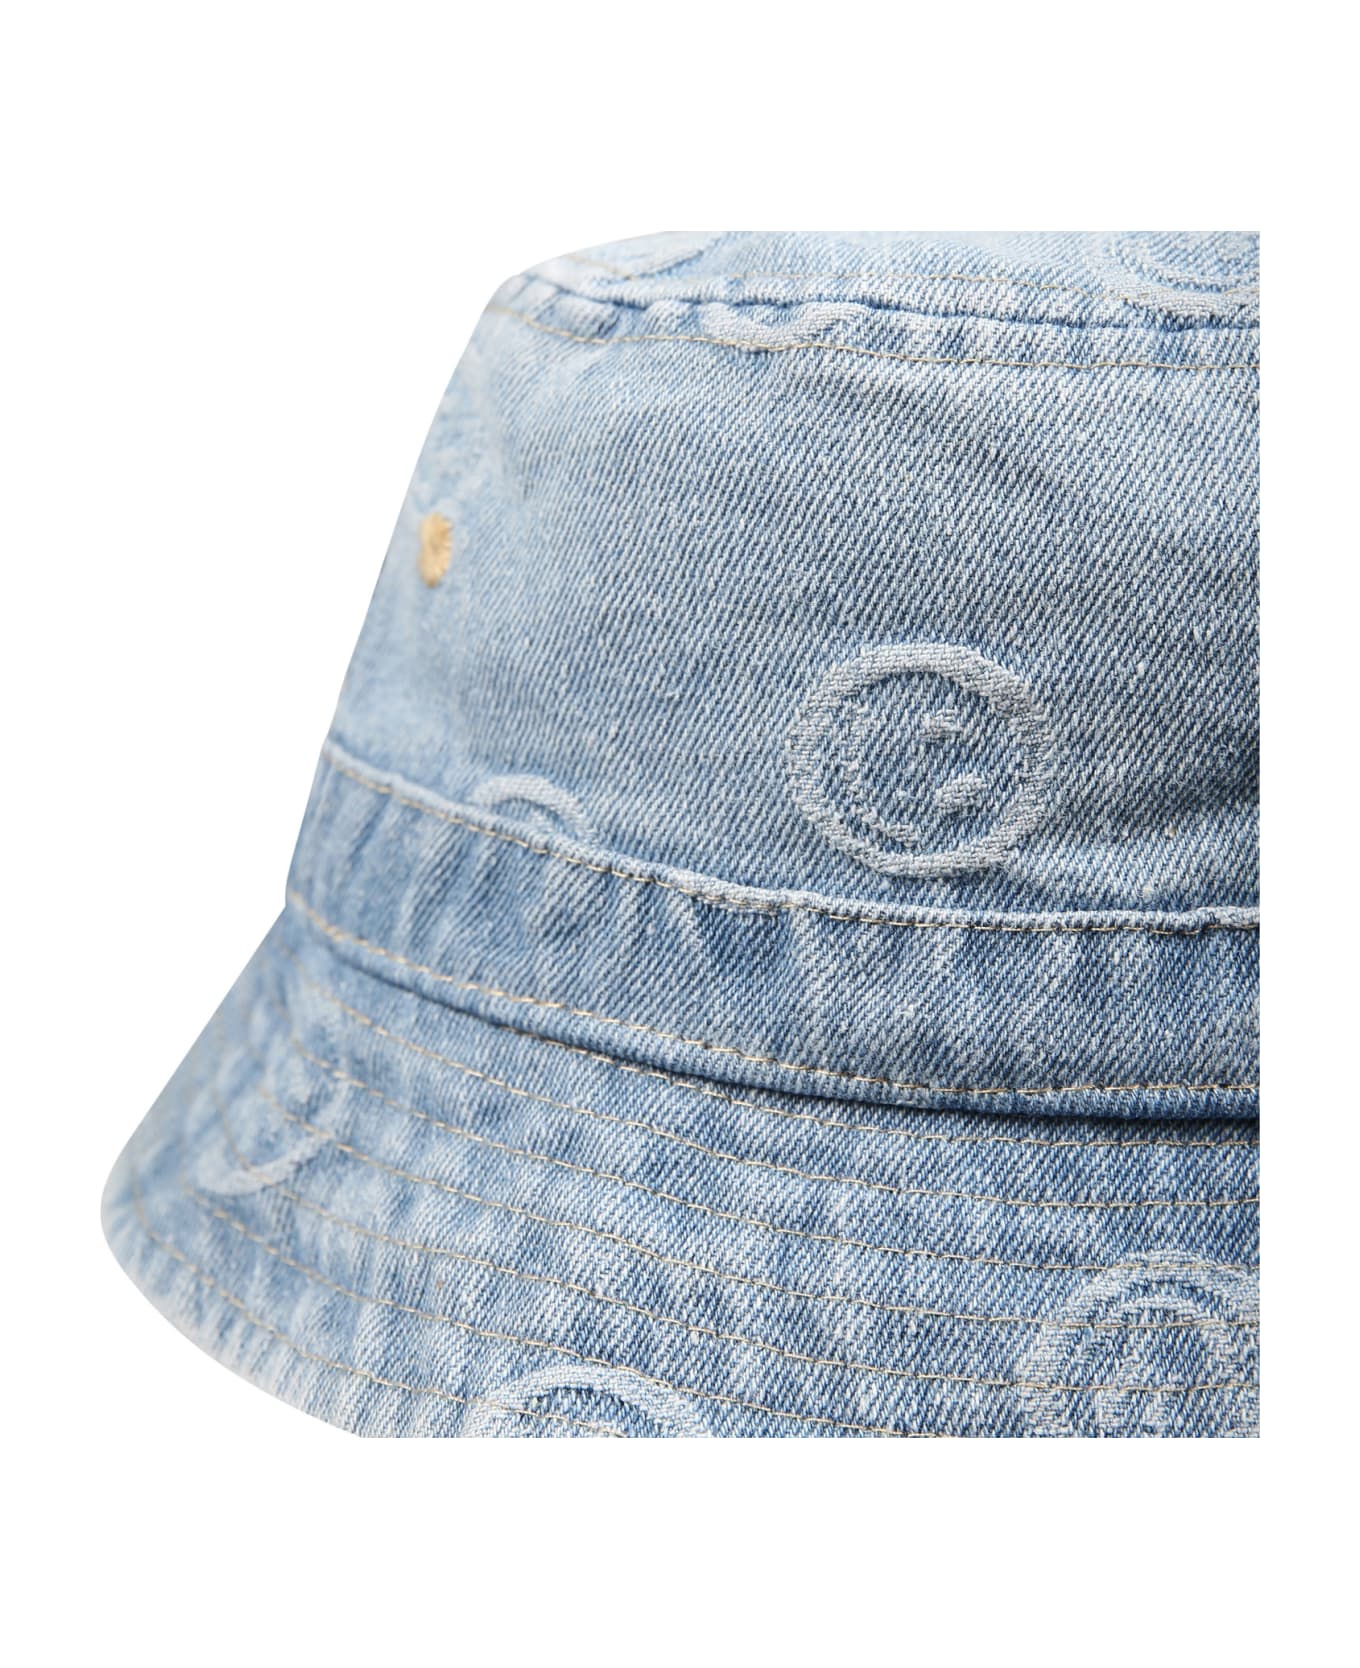 Molo Denim Sky Blue Cloche For Kids With Smile - Denim アクセサリー＆ギフト